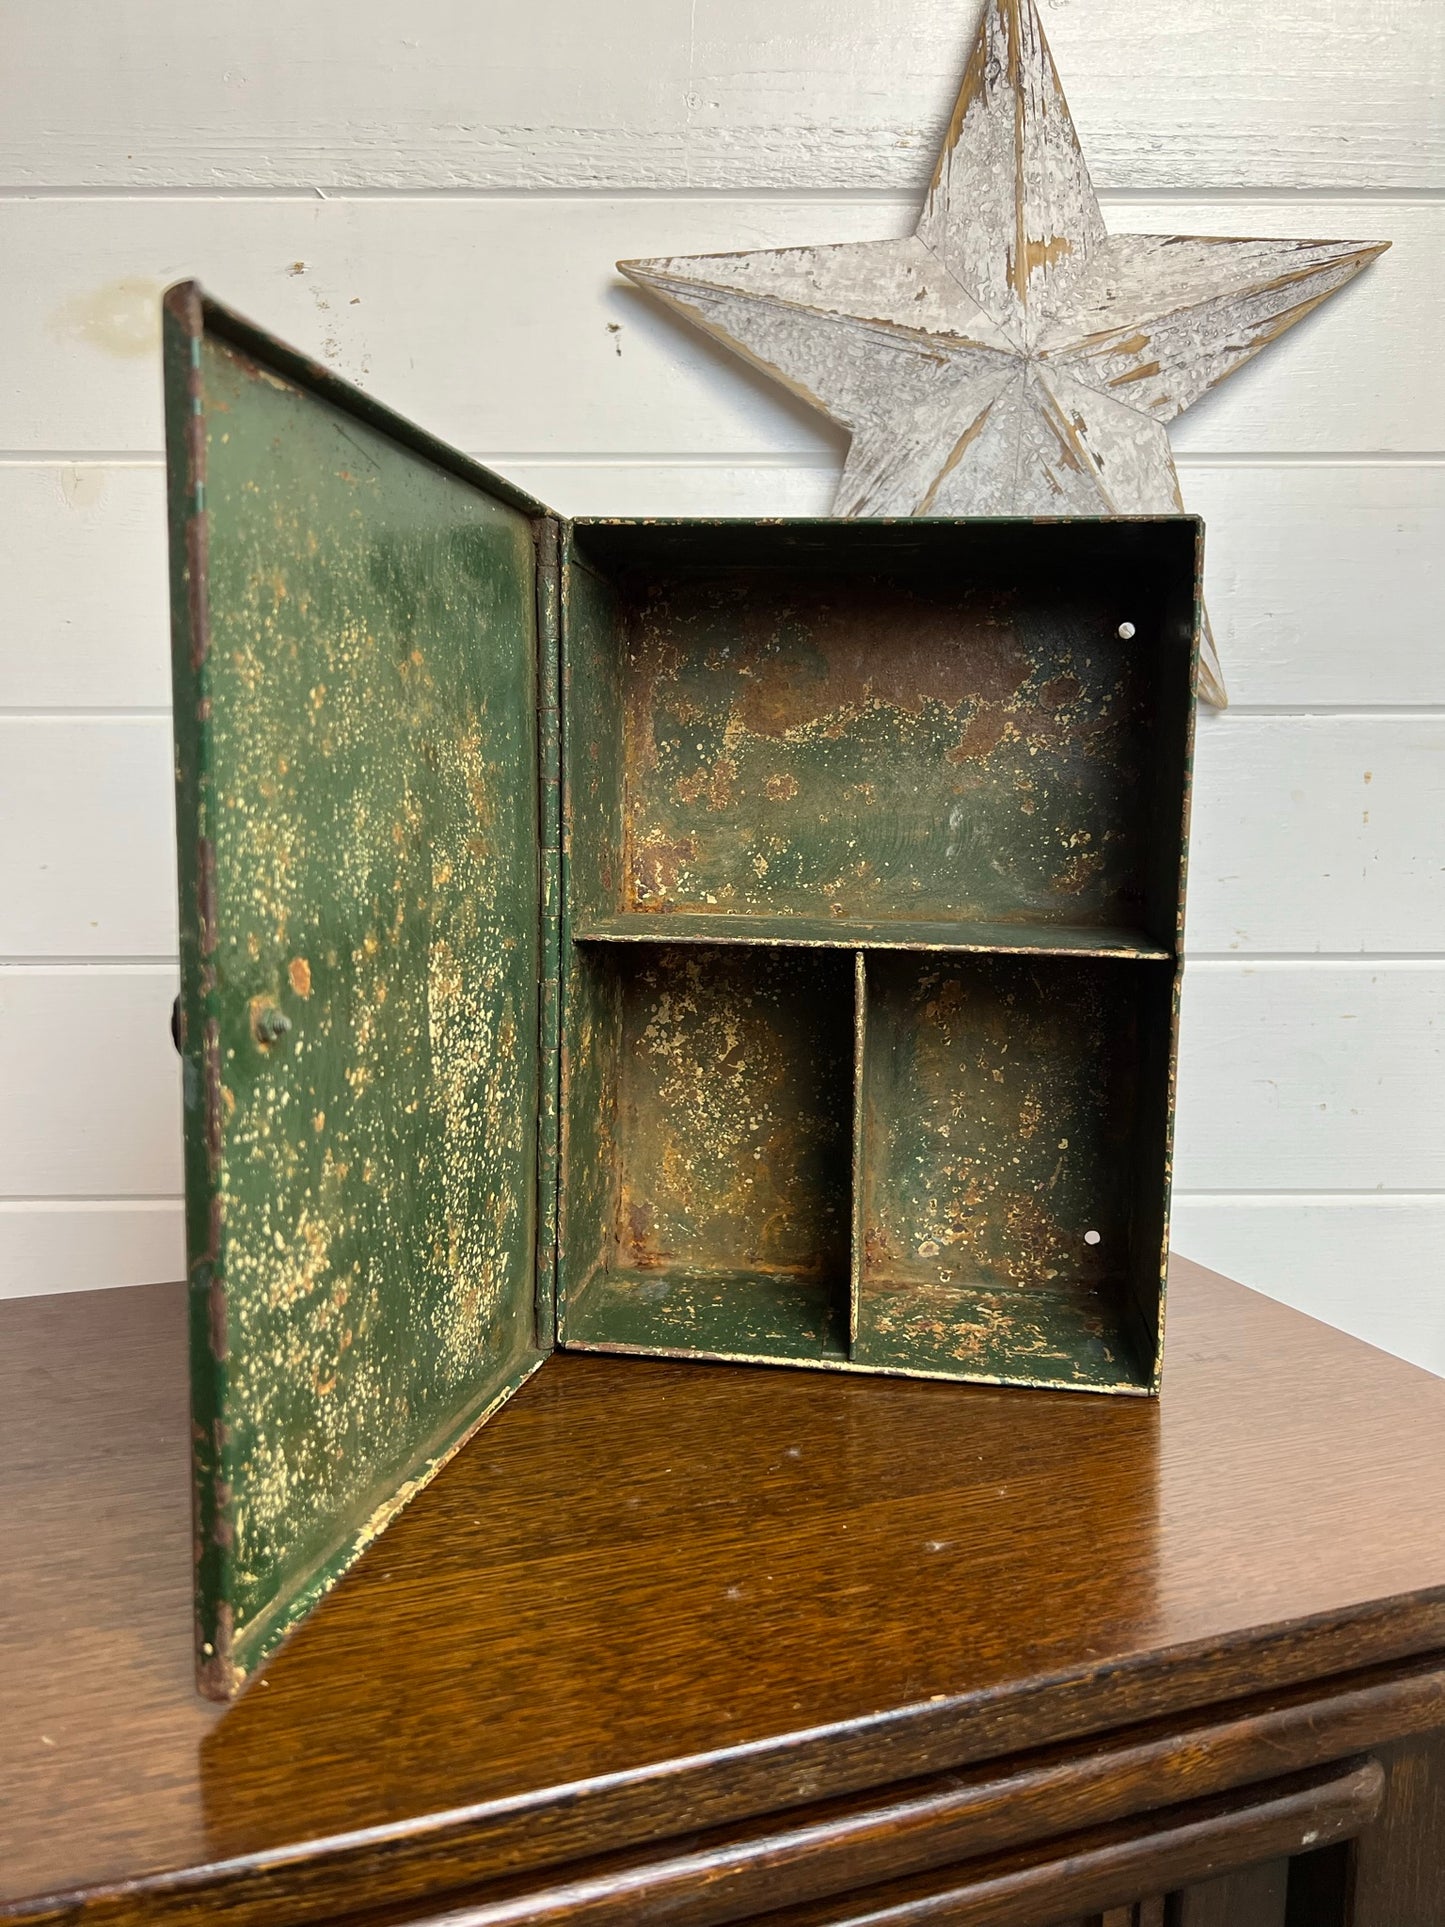 Vintage Metal Wall Box Tool Storage Small Cabinet Vintage Reclaimed Rustic Patina